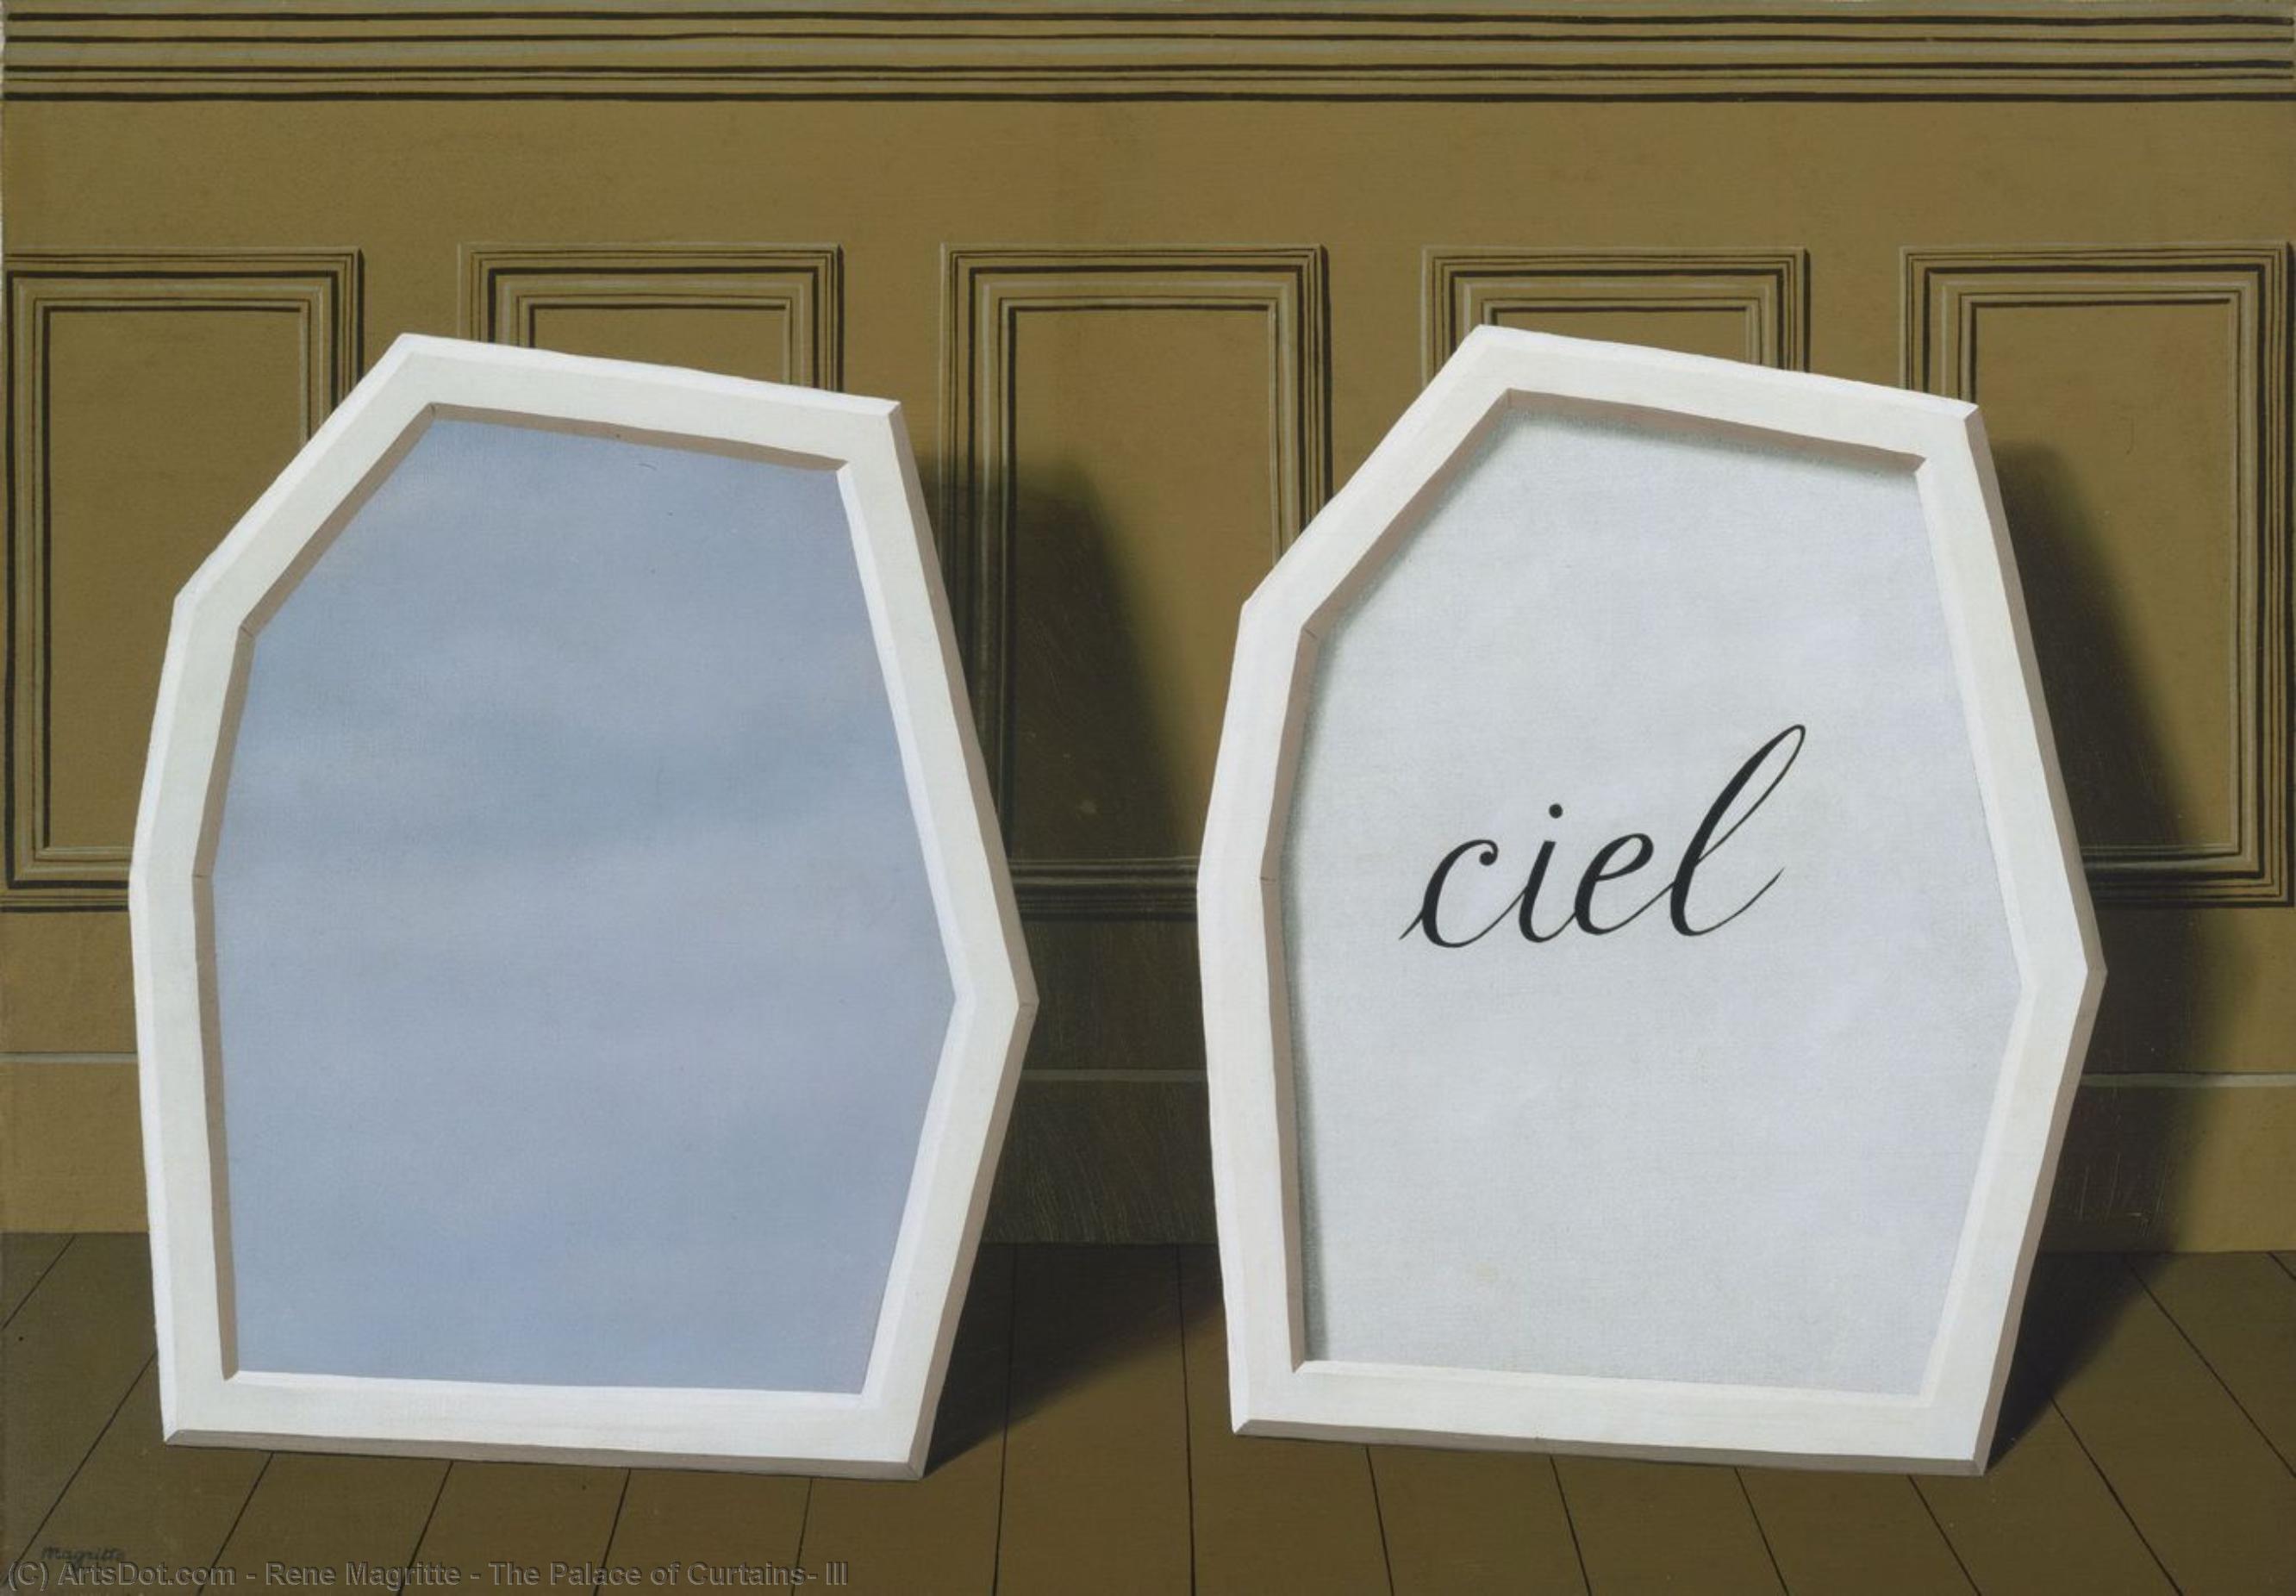 magritte paintings: magritte